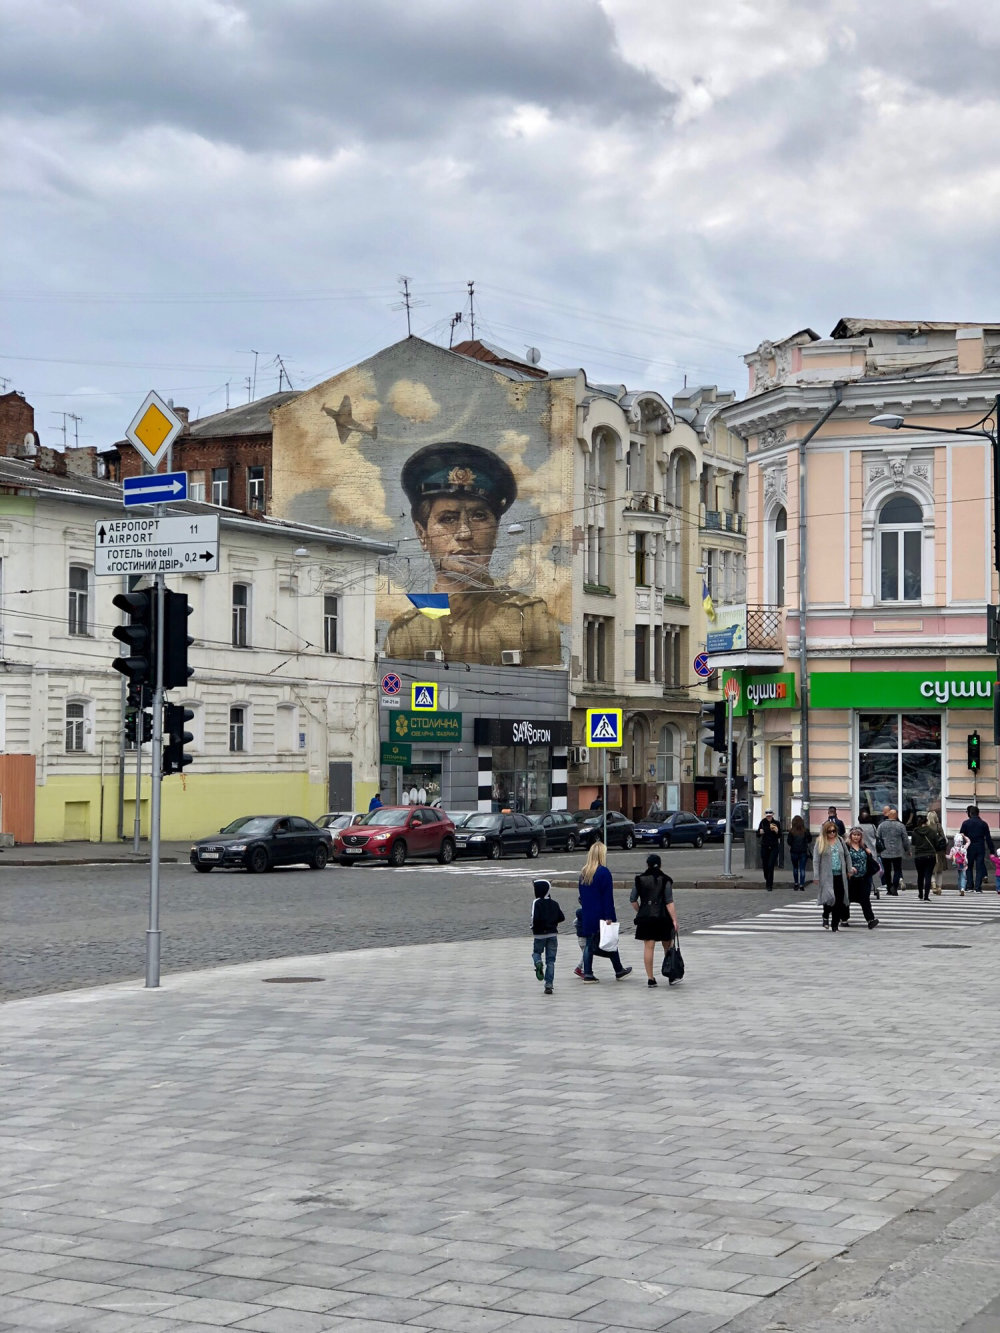 mural in Kharkiv by artist unknown. Tagged: Leonid Bykov